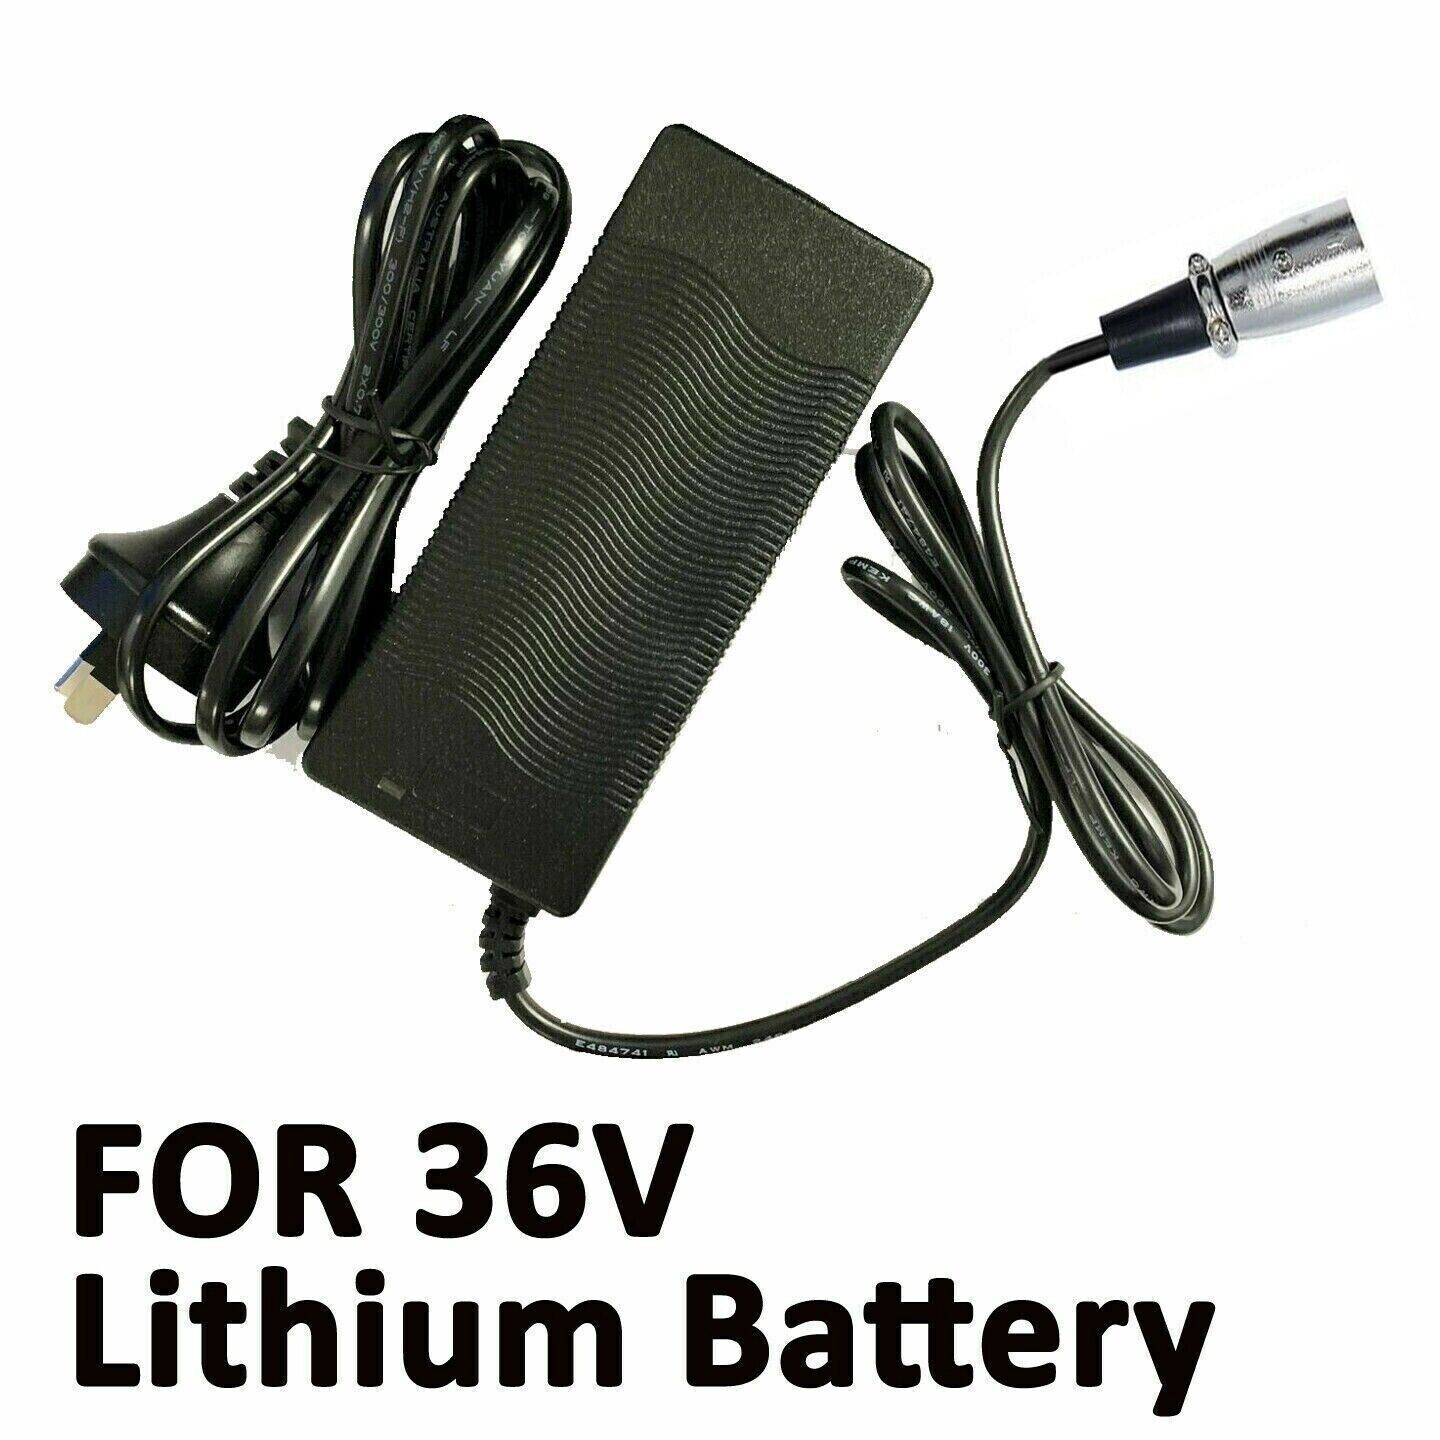 36V 15Ah Electric Bike Bicycle eBike Lithium Fish Battery for 200W 250W 300W - Office Catch